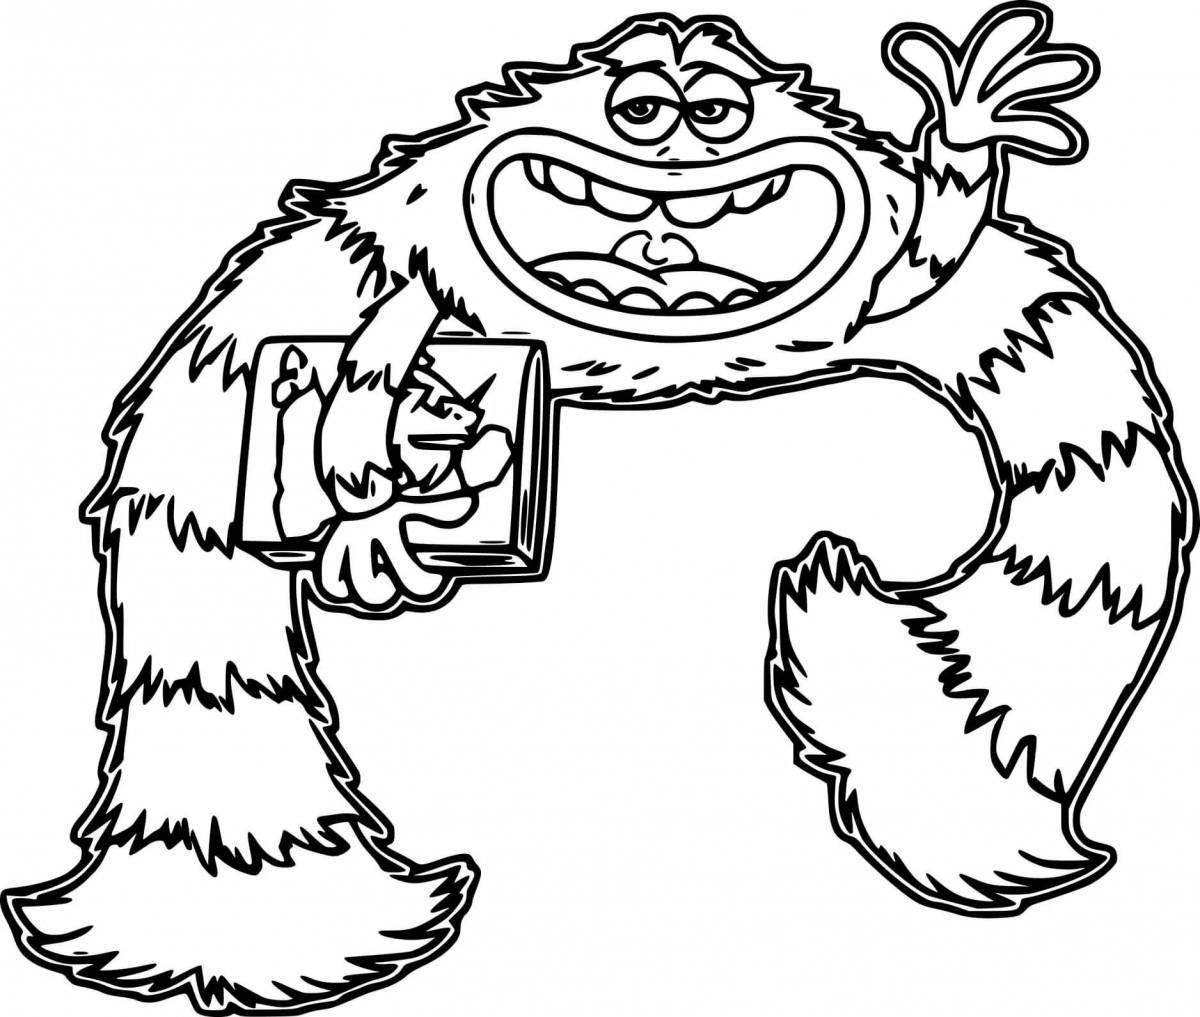 Adorable plush monster coloring page